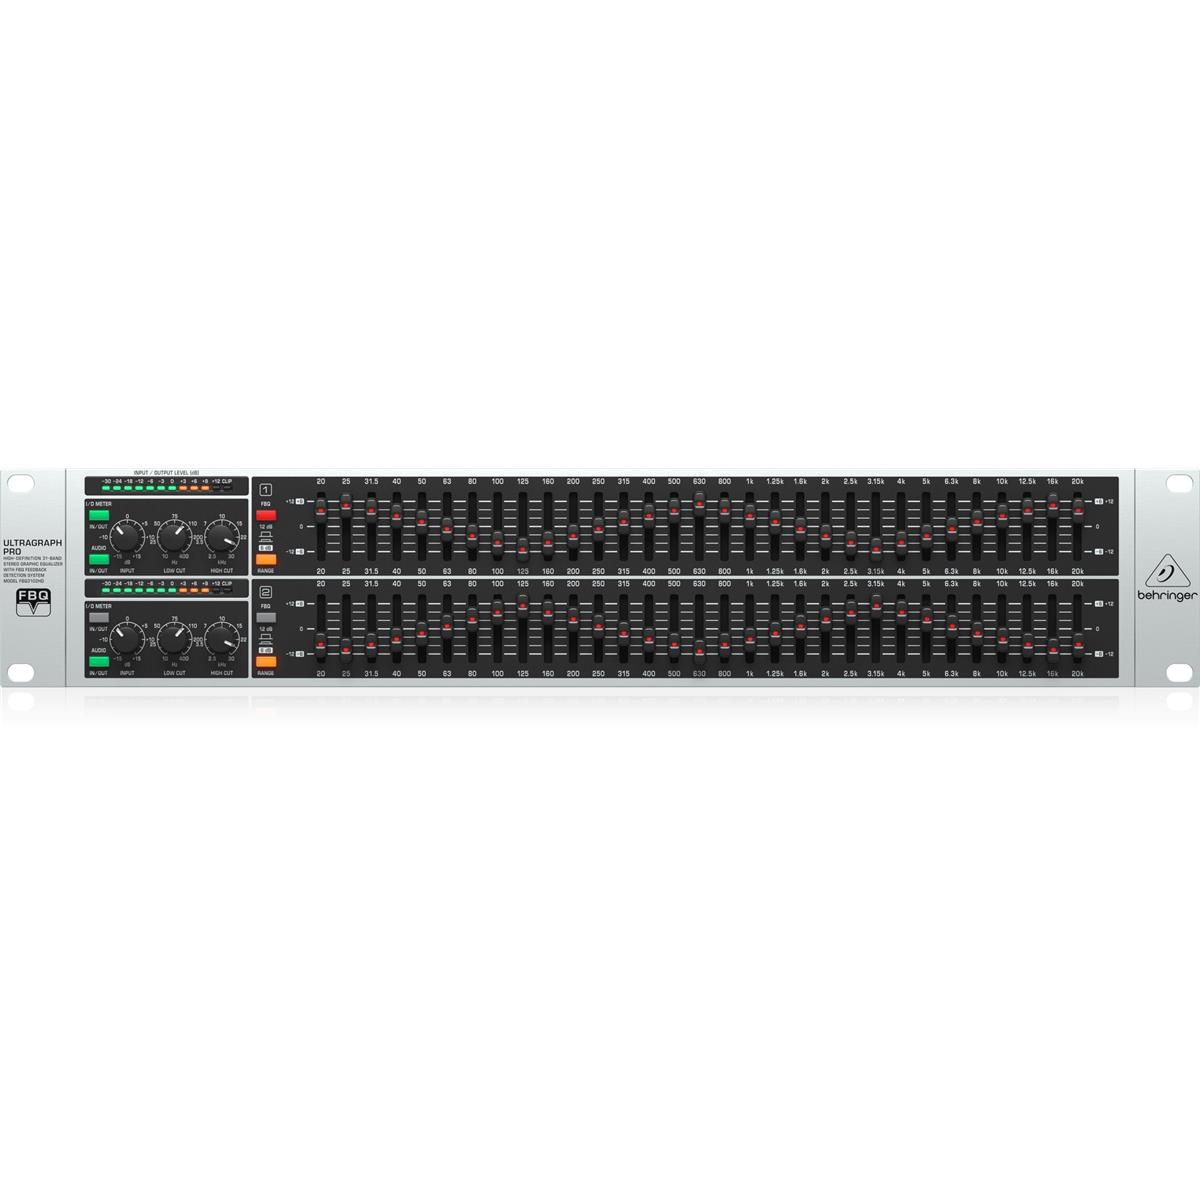 Behringer ULTRAGRAPH PRO FBQ3102HD Dual Channel 31-Band Stereo Graphic Equalizer -  000-B3S02-00010